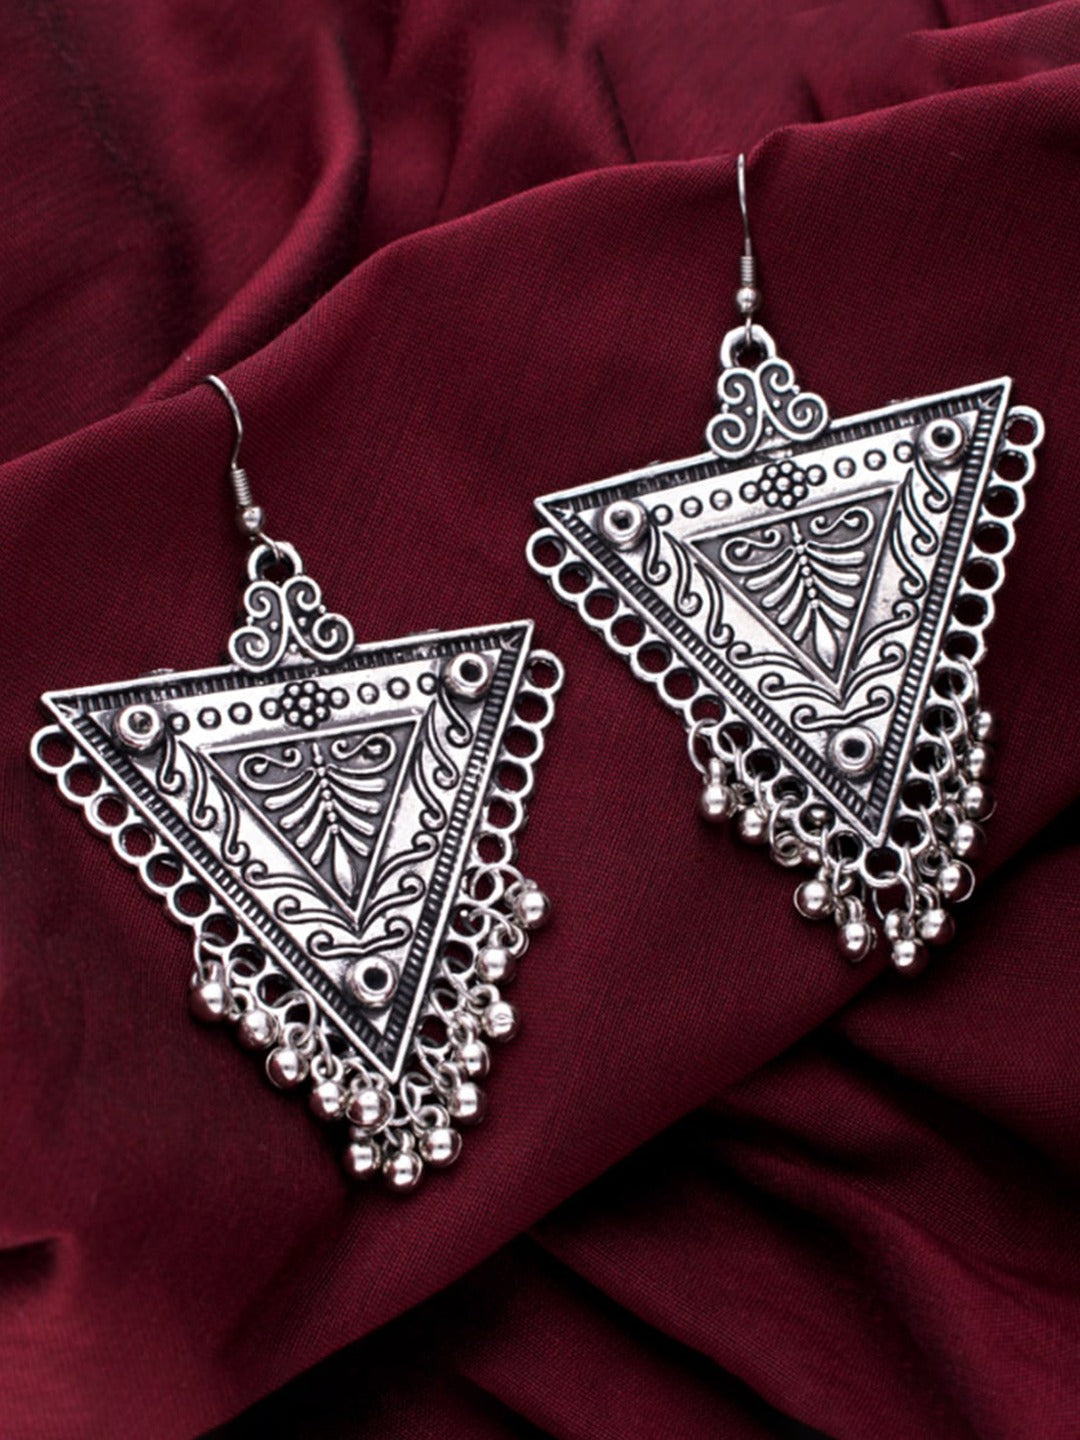 Women's Silver-Toned Contemporary Drop Earrings - Morkanth